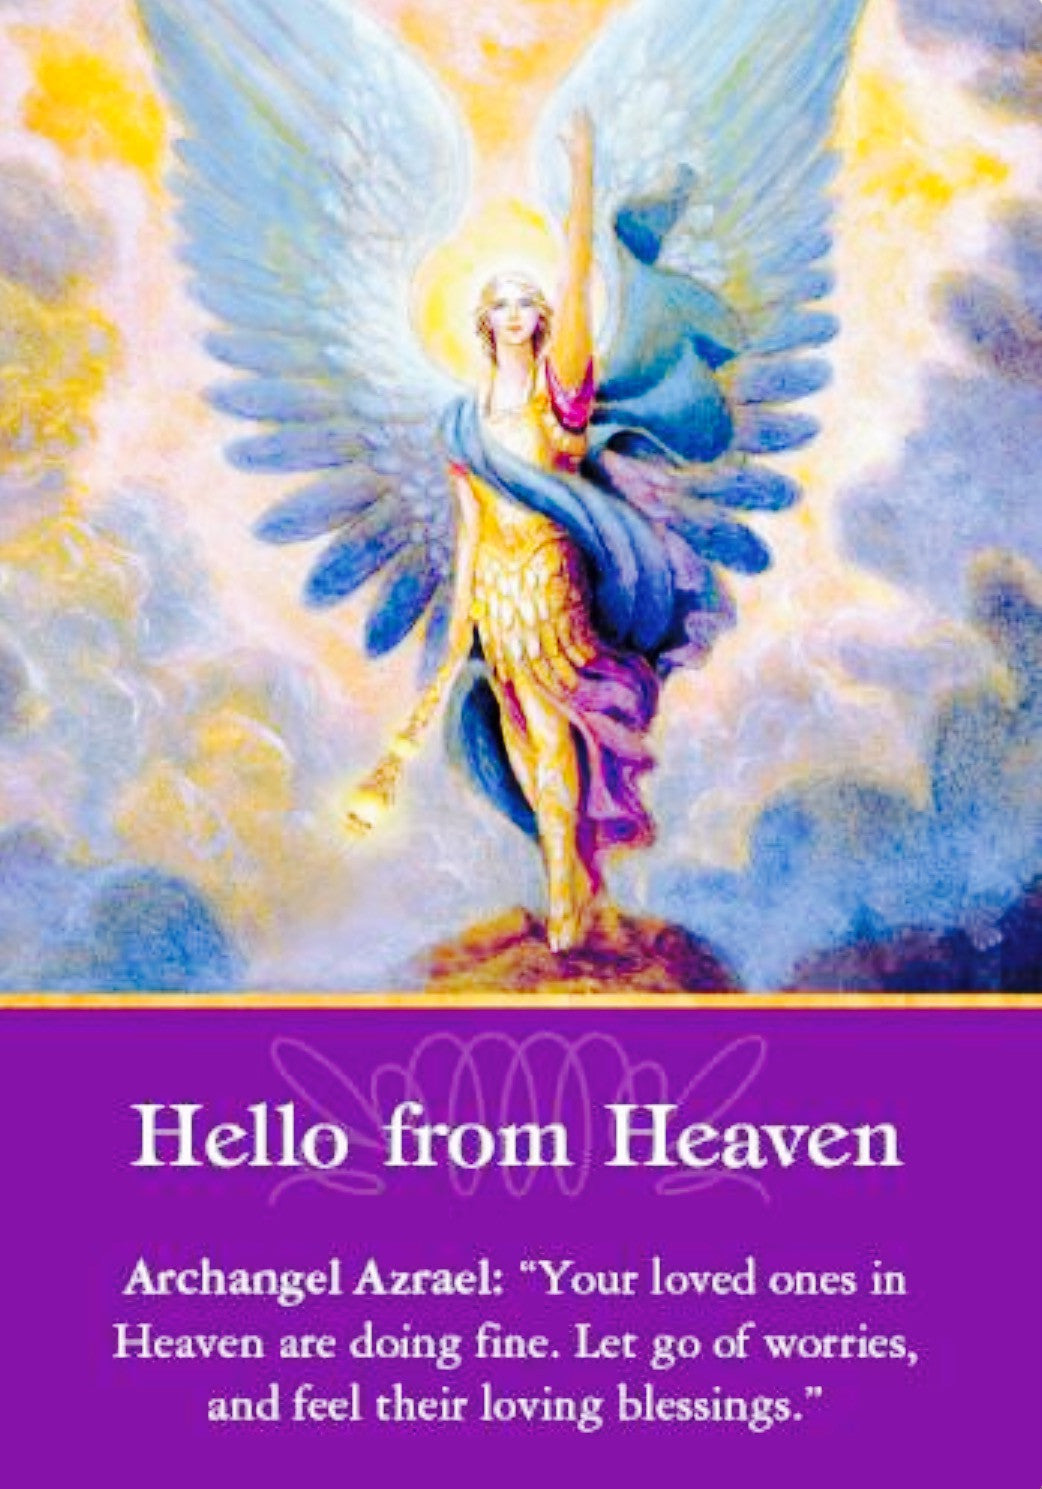 Archangel Azrael: “Your loved ones in Heaven are doing fine. Let go of worries, and feel their loving blessings.”